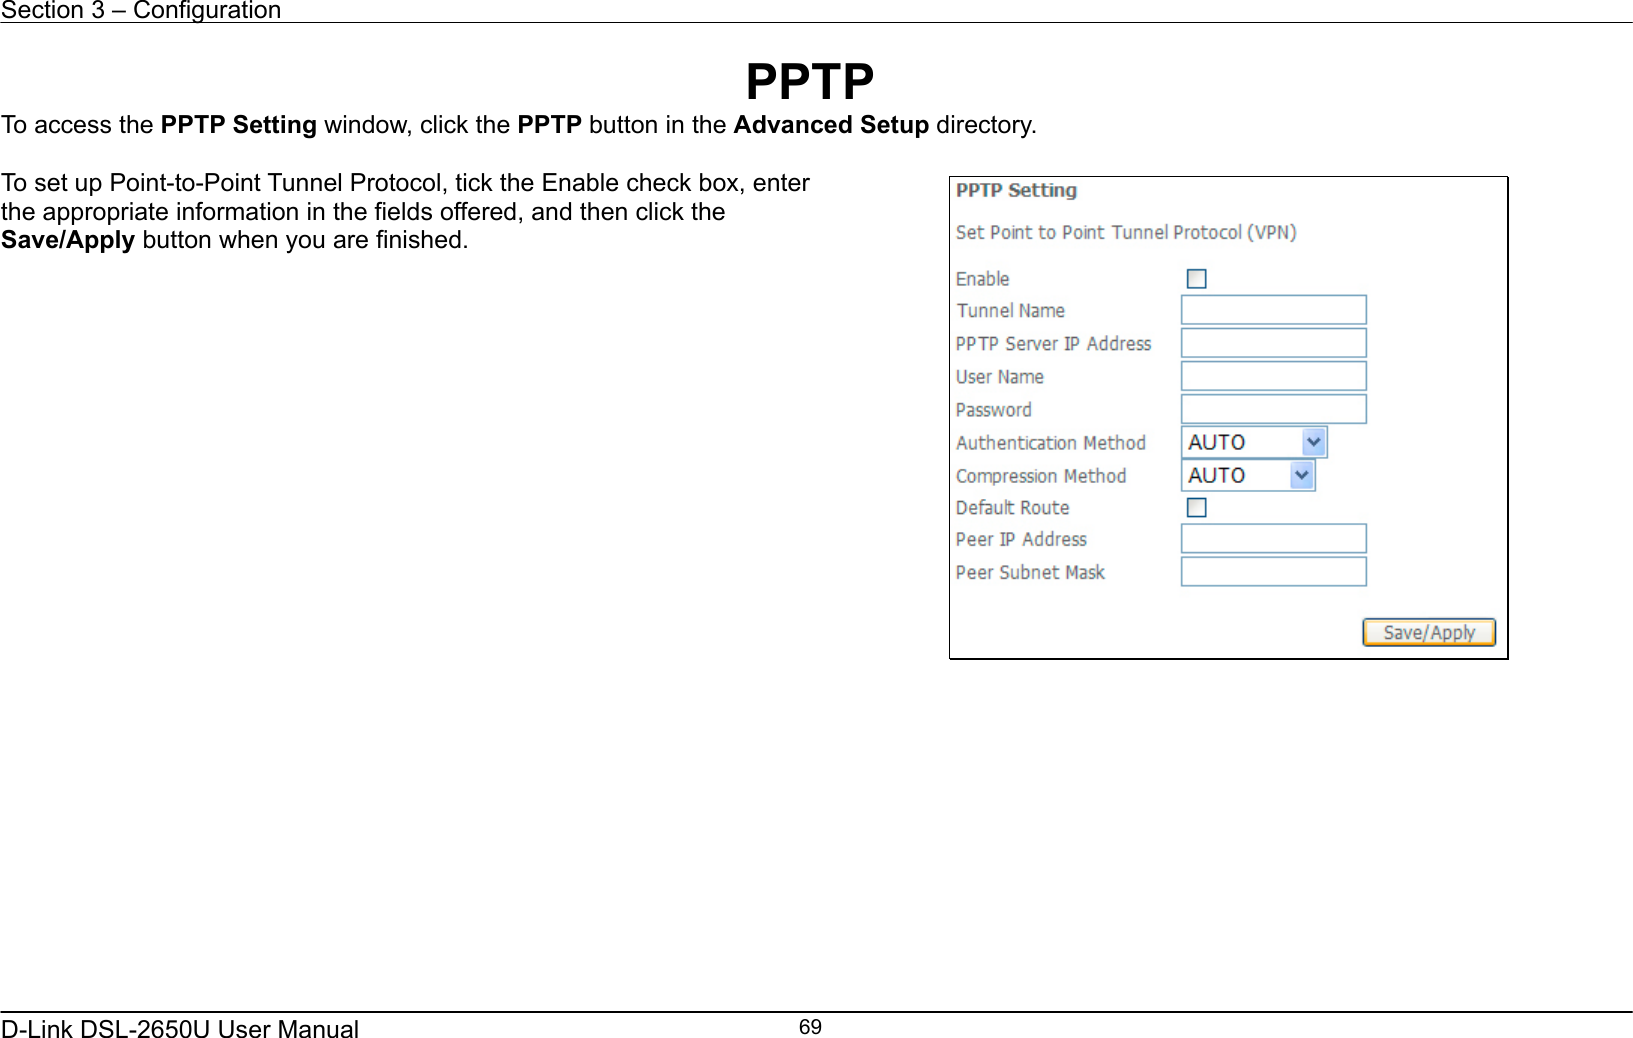 Section 3 – Configuration   D-Link DSL-2650U User Manual    69PPTP To access the PPTP Setting window, click the PPTP button in the Advanced Setup directory.  To set up Point-to-Point Tunnel Protocol, tick the Enable check box, enter the appropriate information in the fields offered, and then click the Save/Apply button when you are finished.              